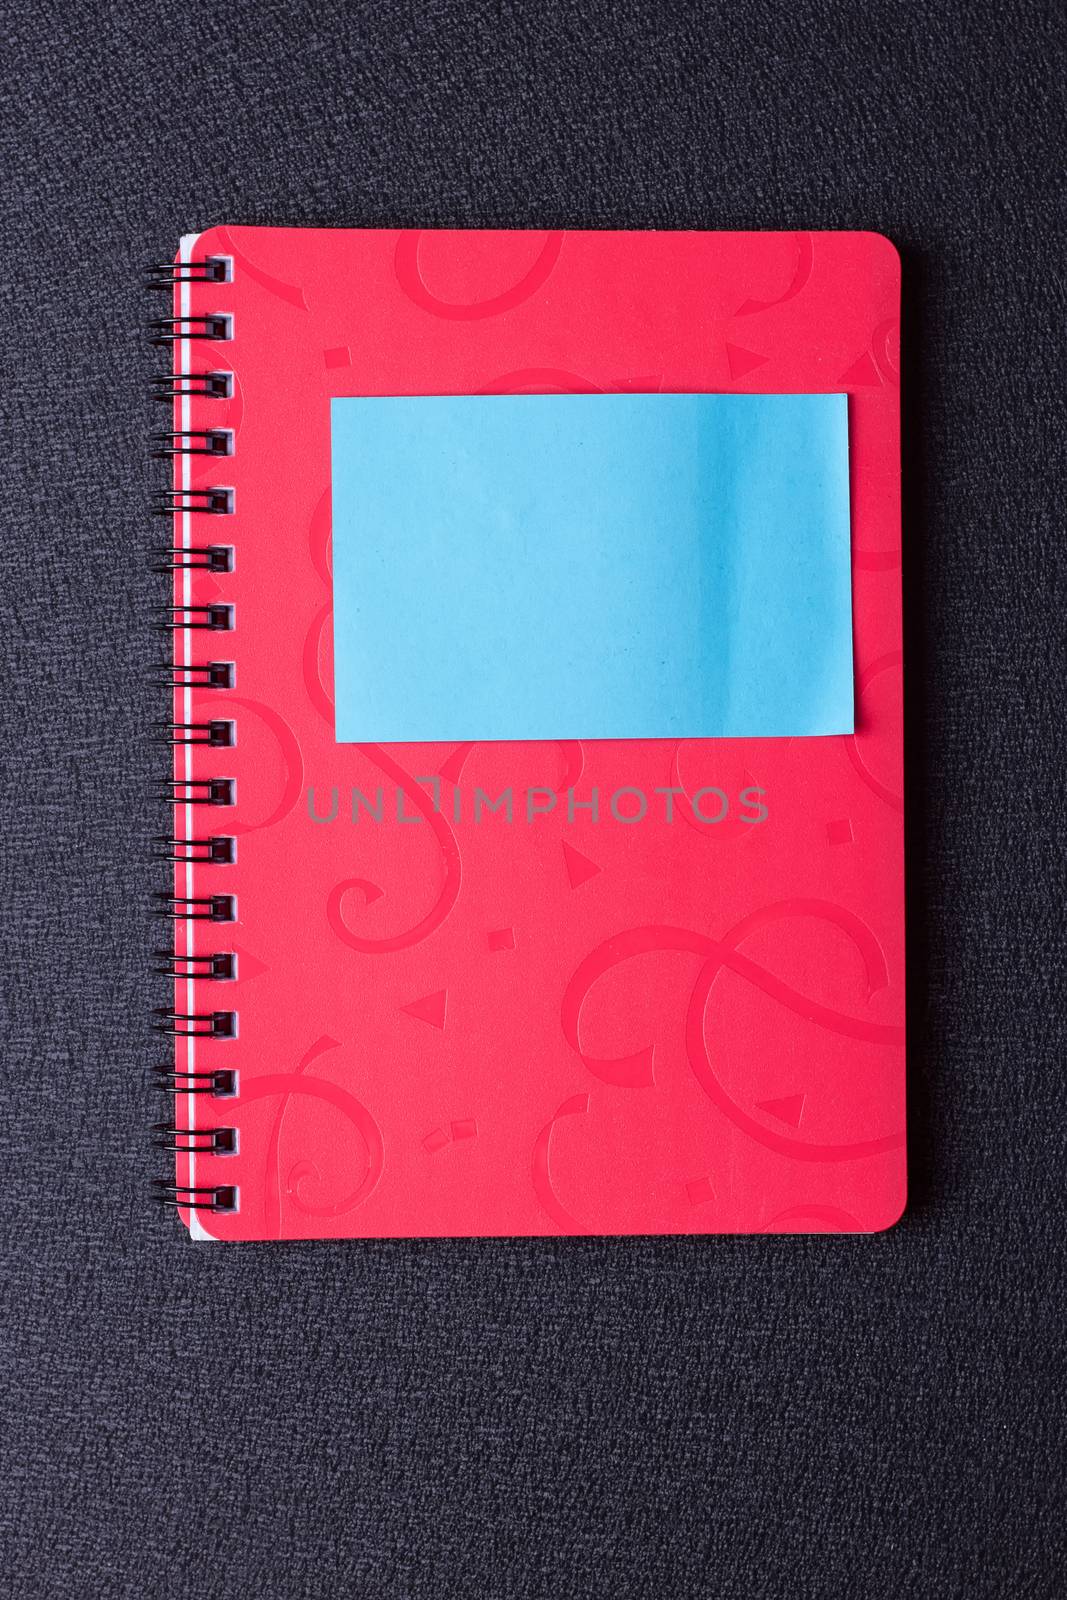 Red notepad on a spiral with a sticker on a black background